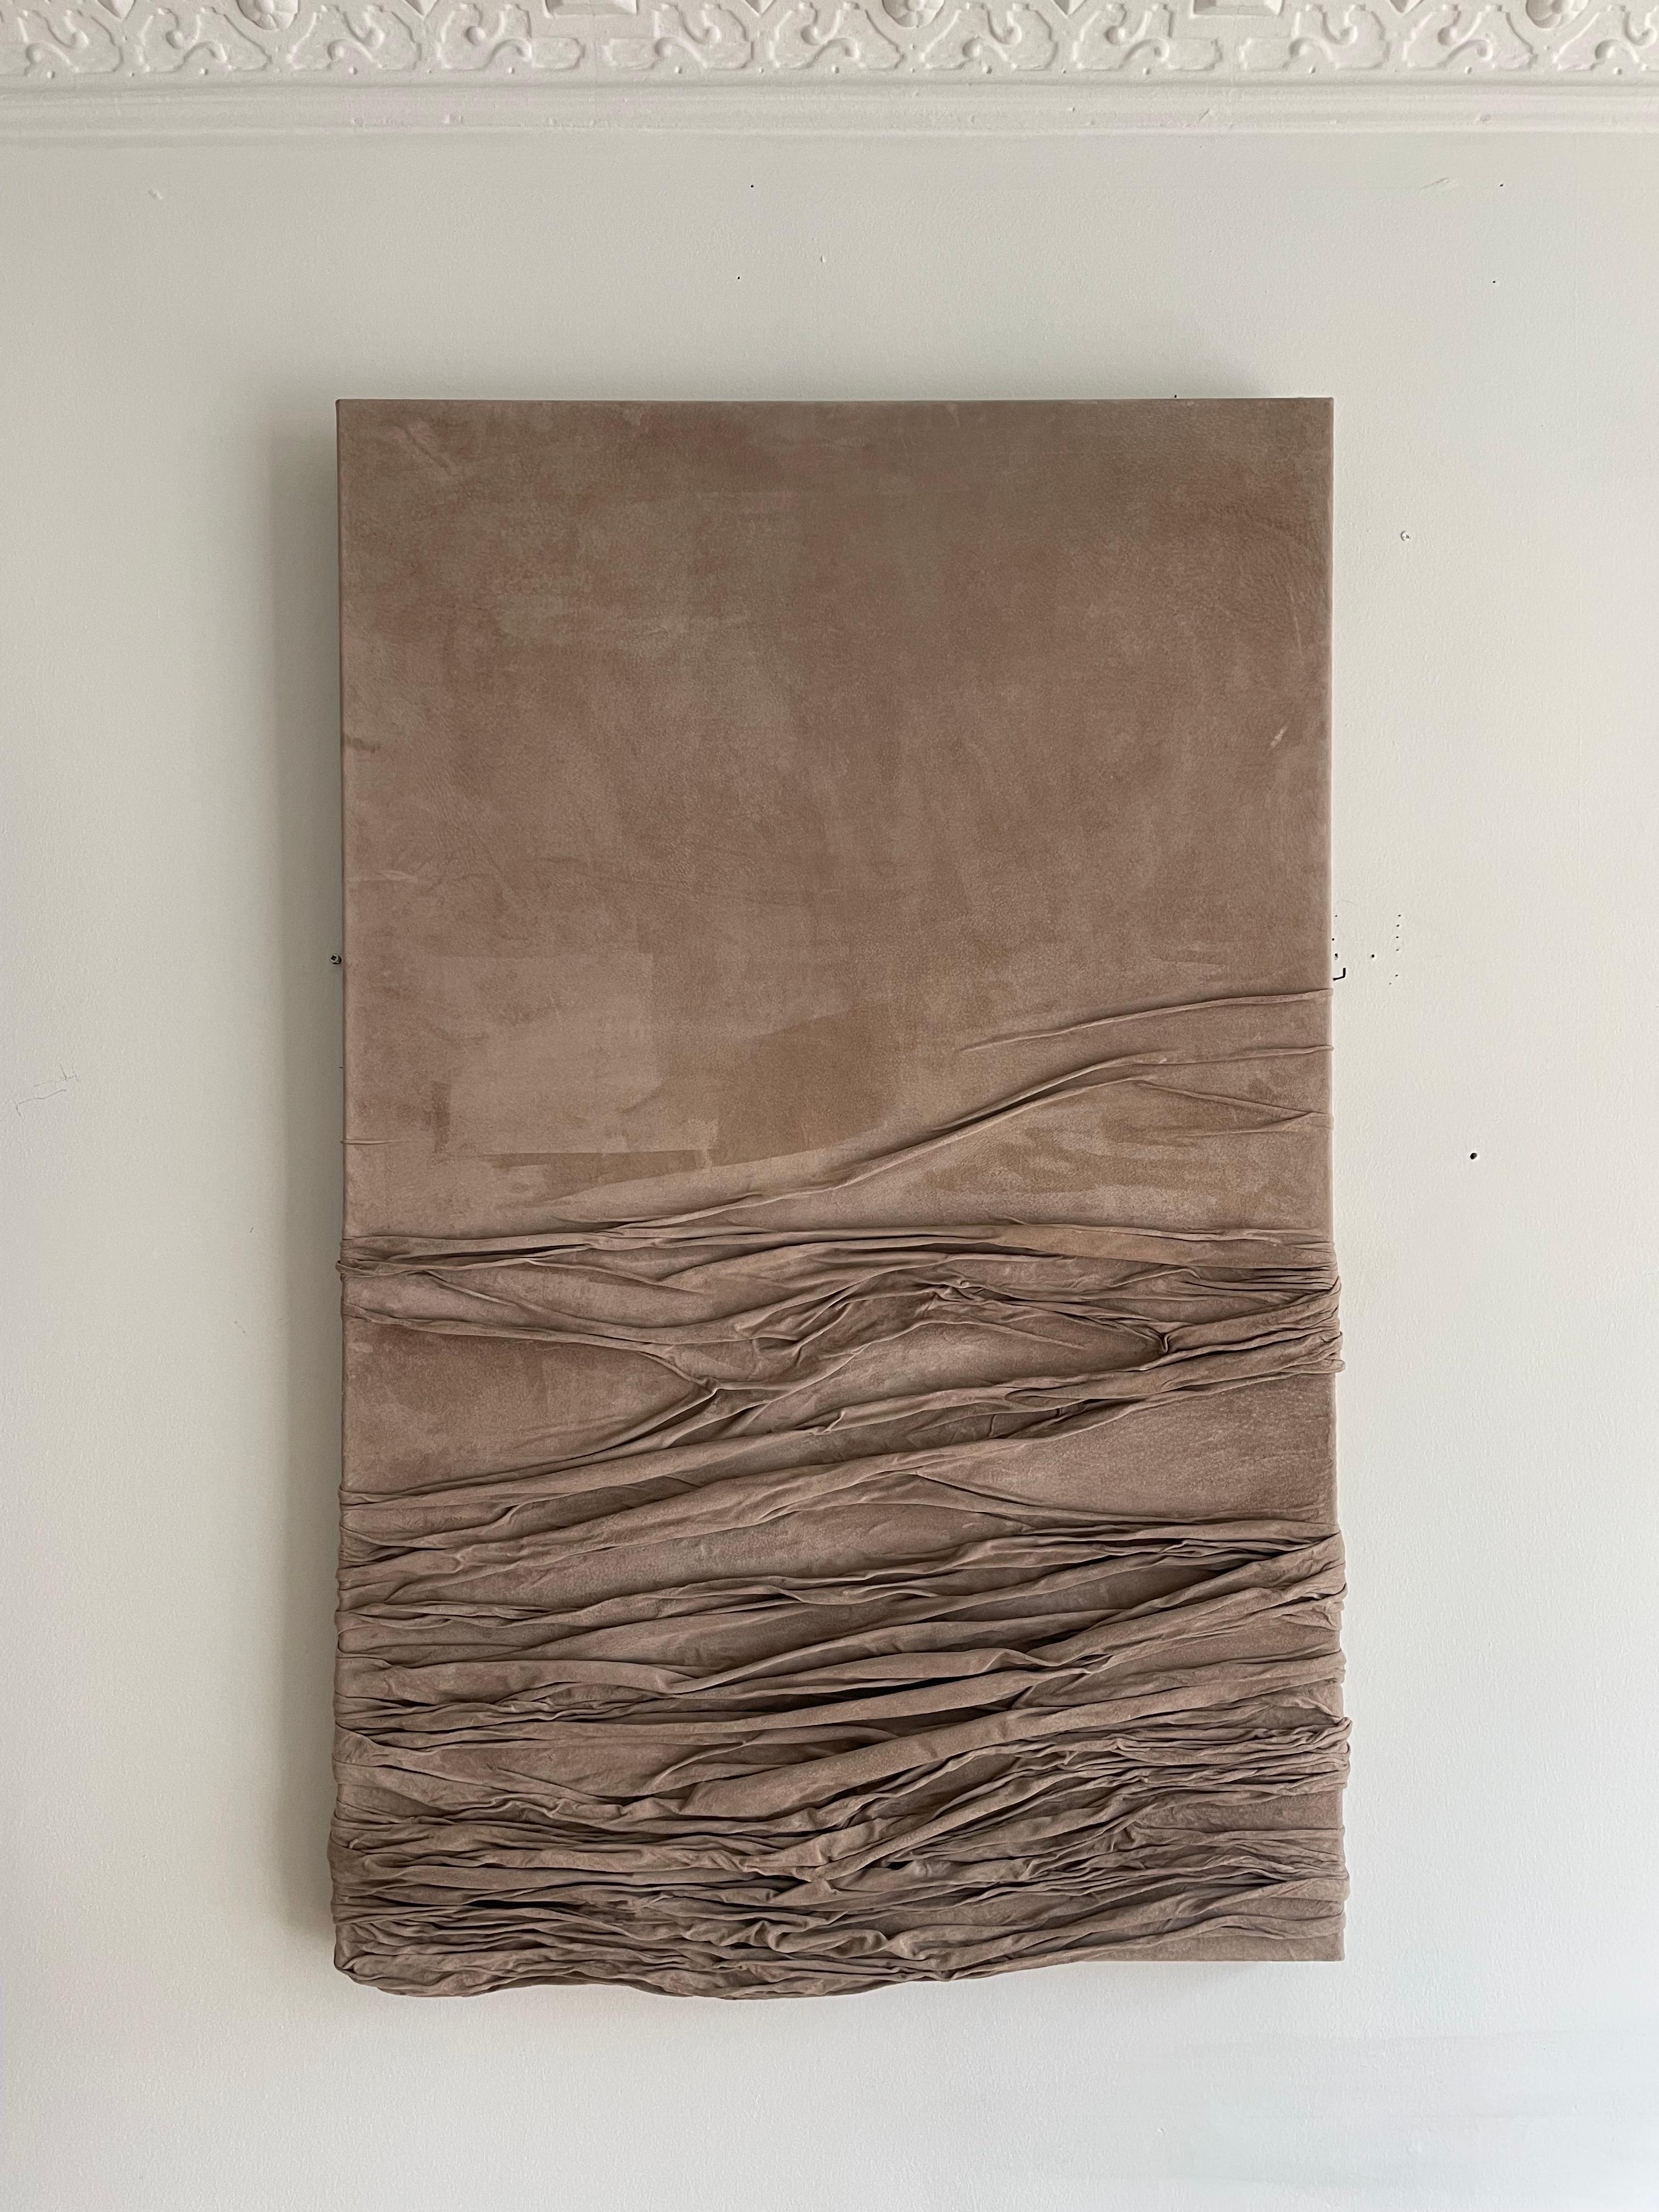 This elegant and contemporary relief artwork is crafted by Danish artist Benedicte Maria Bech Pedersen (1988-), known for her unique approach to leather as a medium. The large feminine relief is made of a one-piece suede leather, which is